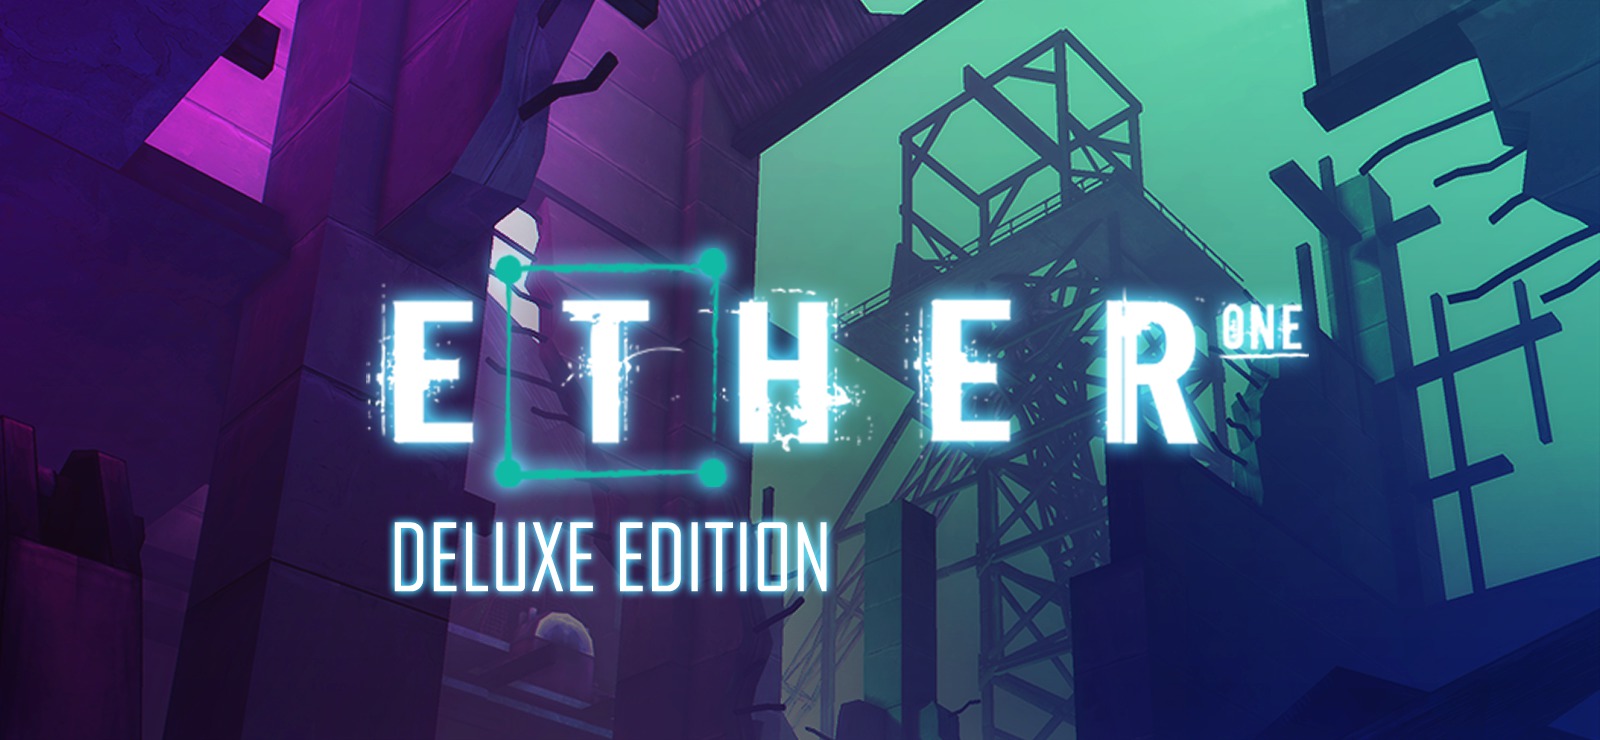 Ether One Deluxe Edition